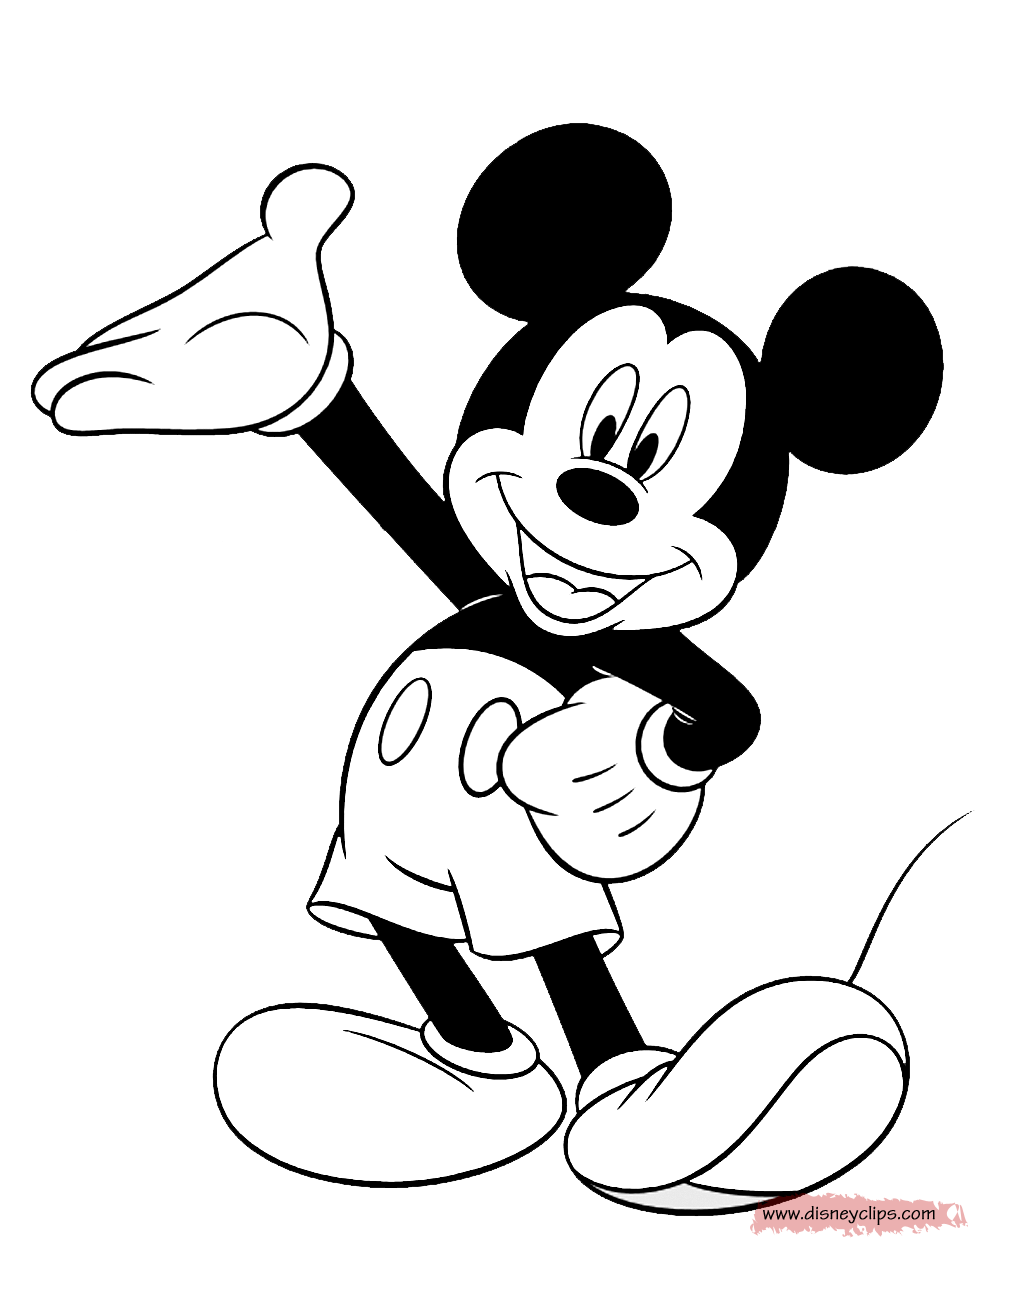 mickey minnie mouse coloring pages mickey mouse clubhouse 1 free disney coloring sheets coloring pages mouse minnie mickey 